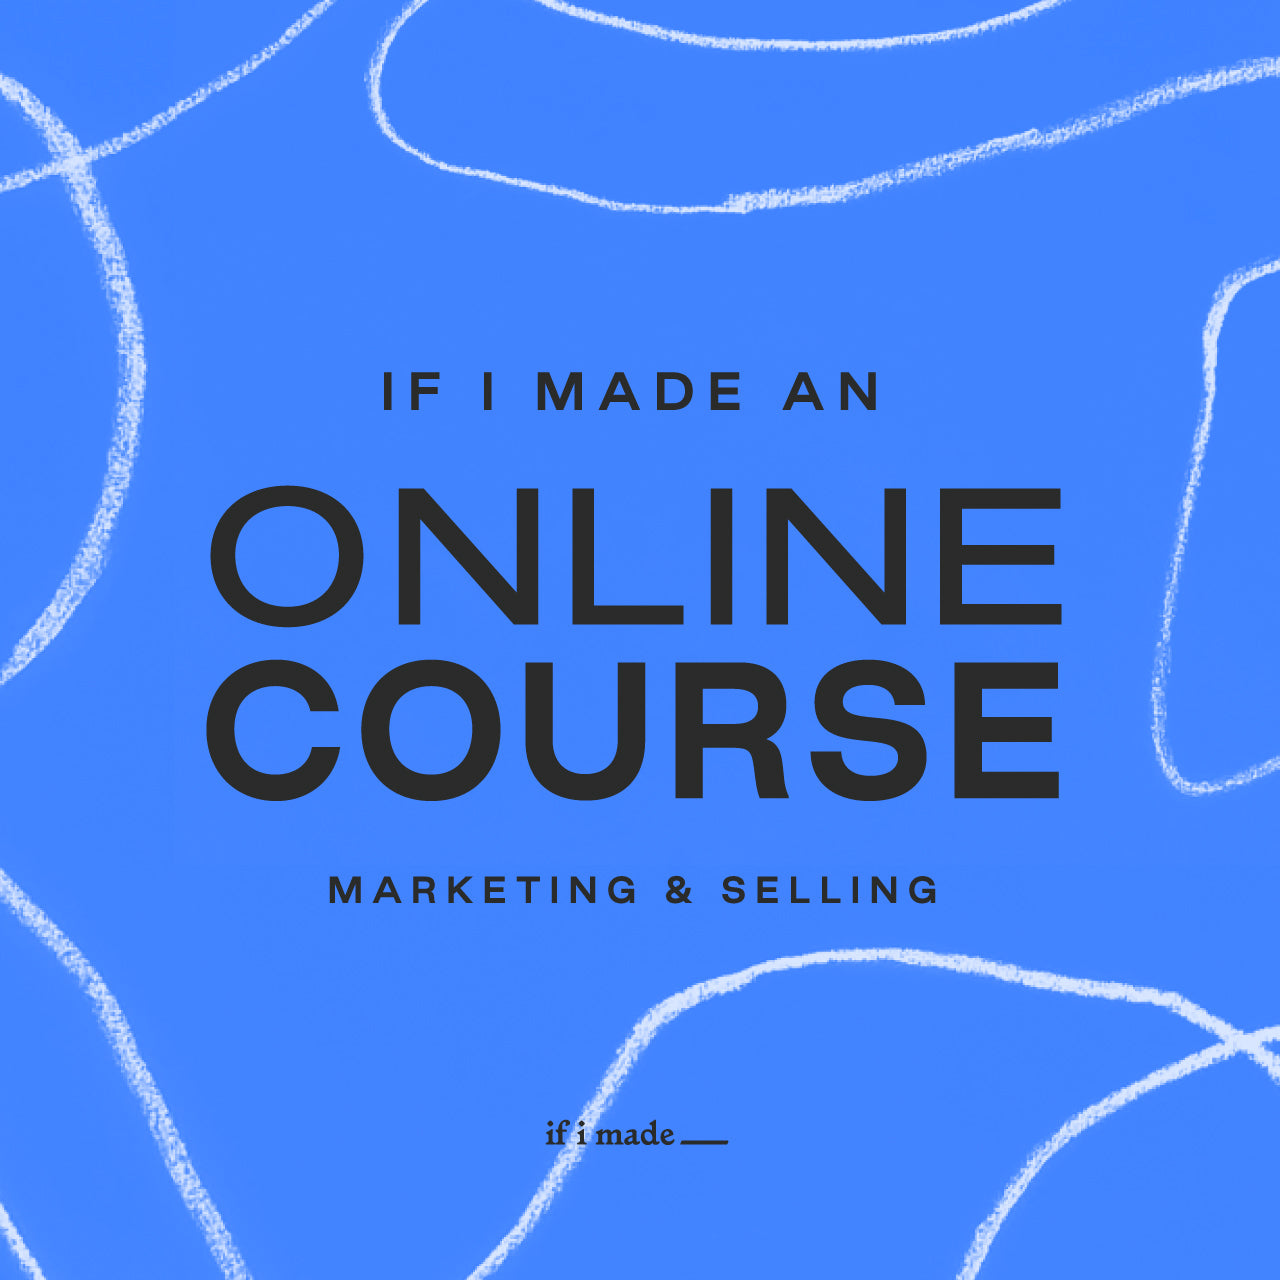 If I Made An Online Course: Marketing & Selling an Online Course (SPP) - 8 Payments of $99